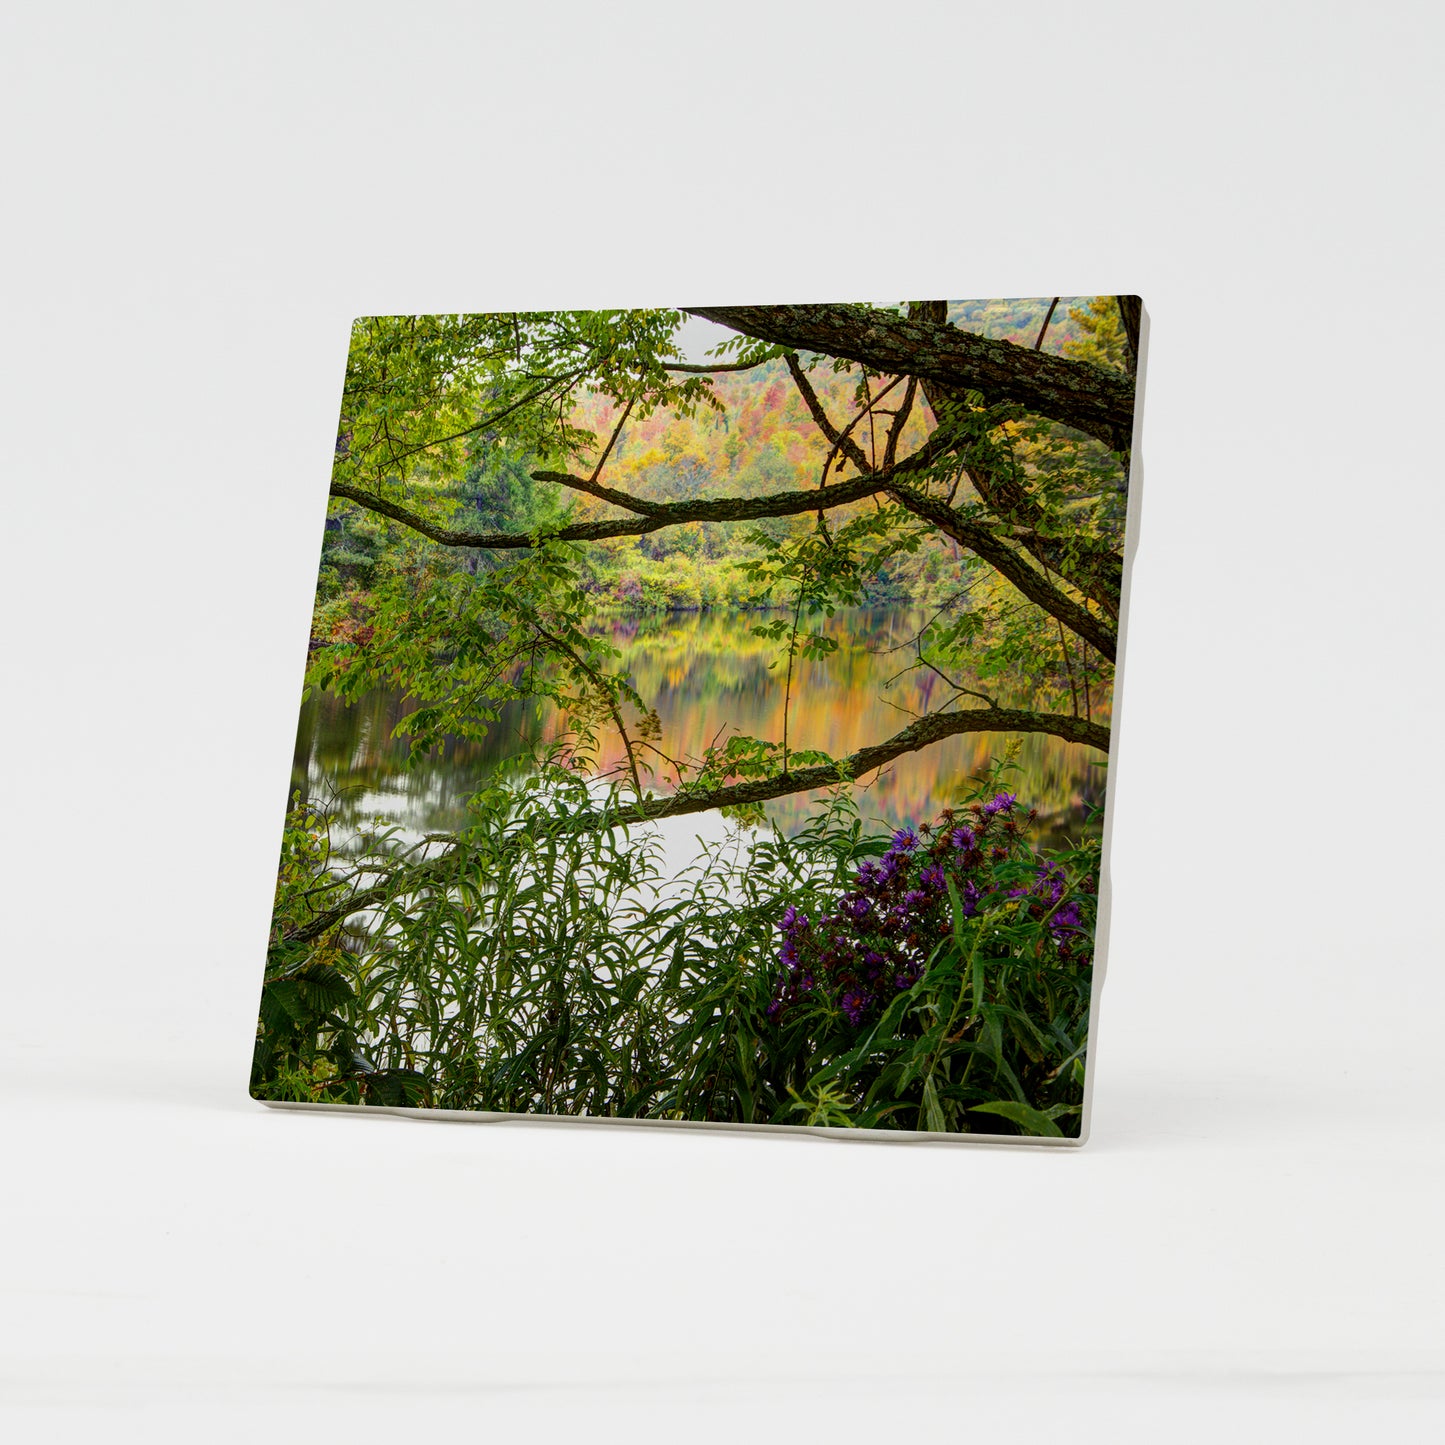 Coffin Pond Autumn Reflections Ceramic Coaster by Chris Whiton